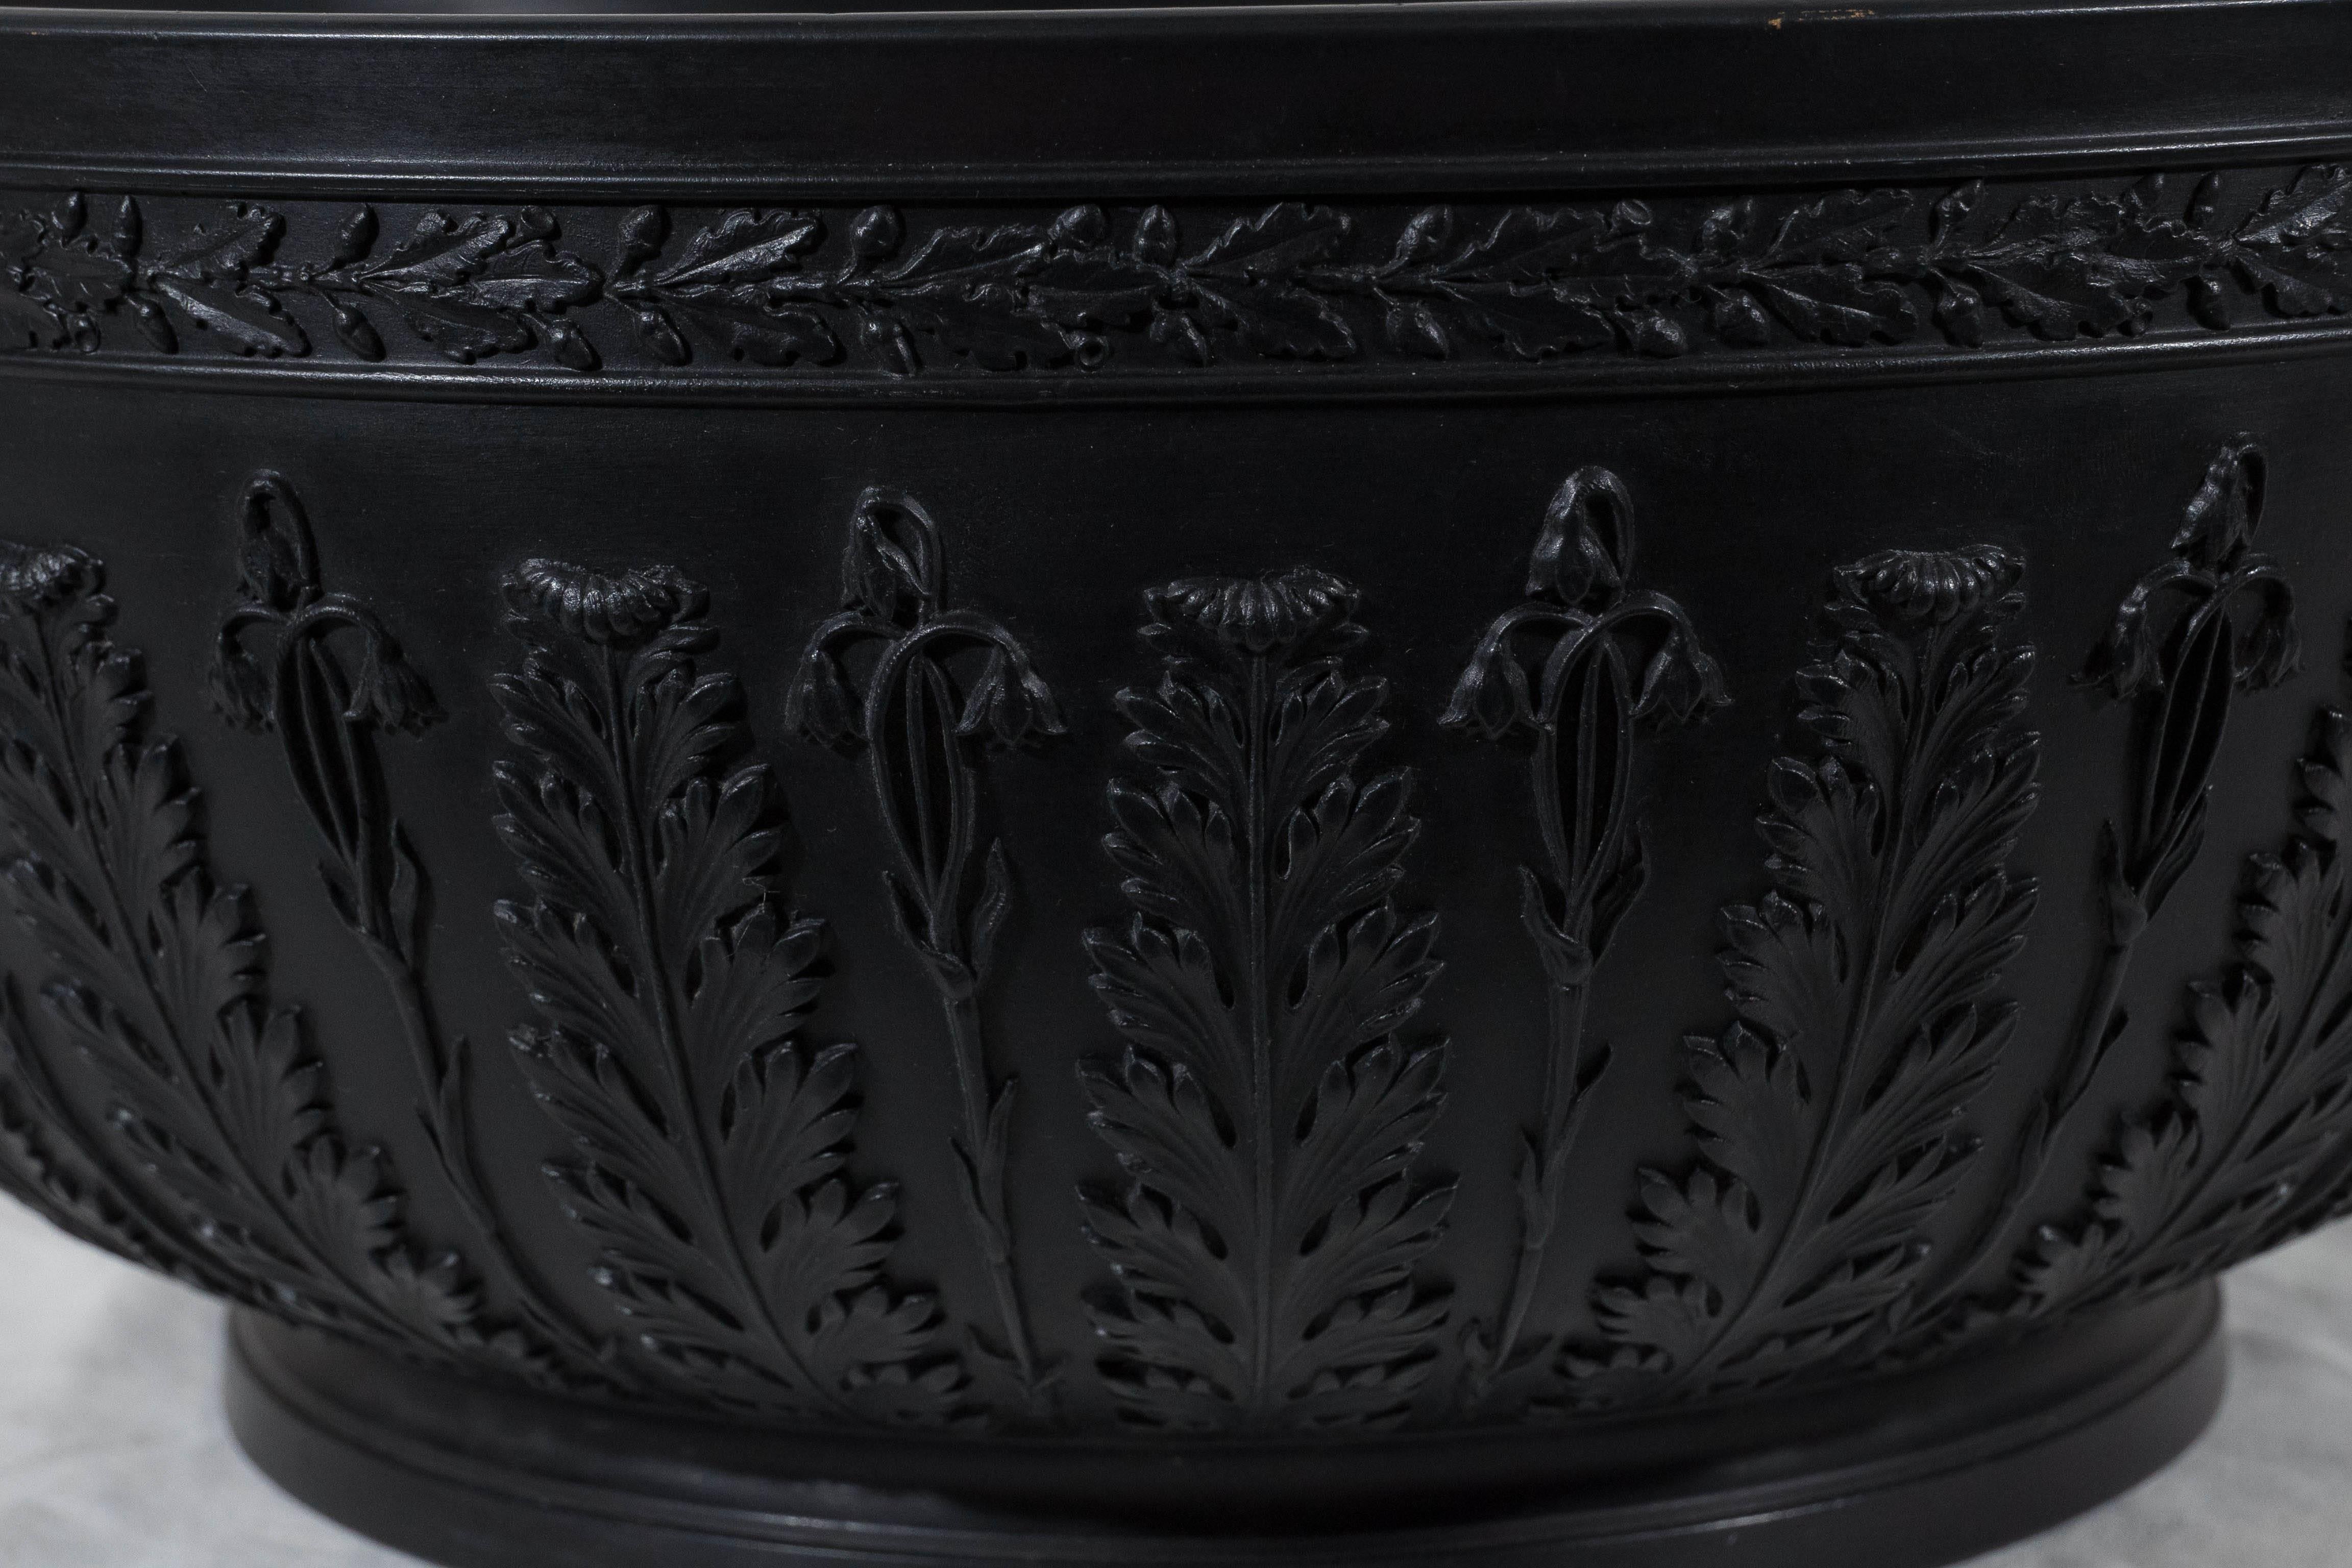 A large Wedgwood black basalt bowl decorated with acanthus leaves around the side and acorns and oak leaves along the top edge. The reverse with impressed 